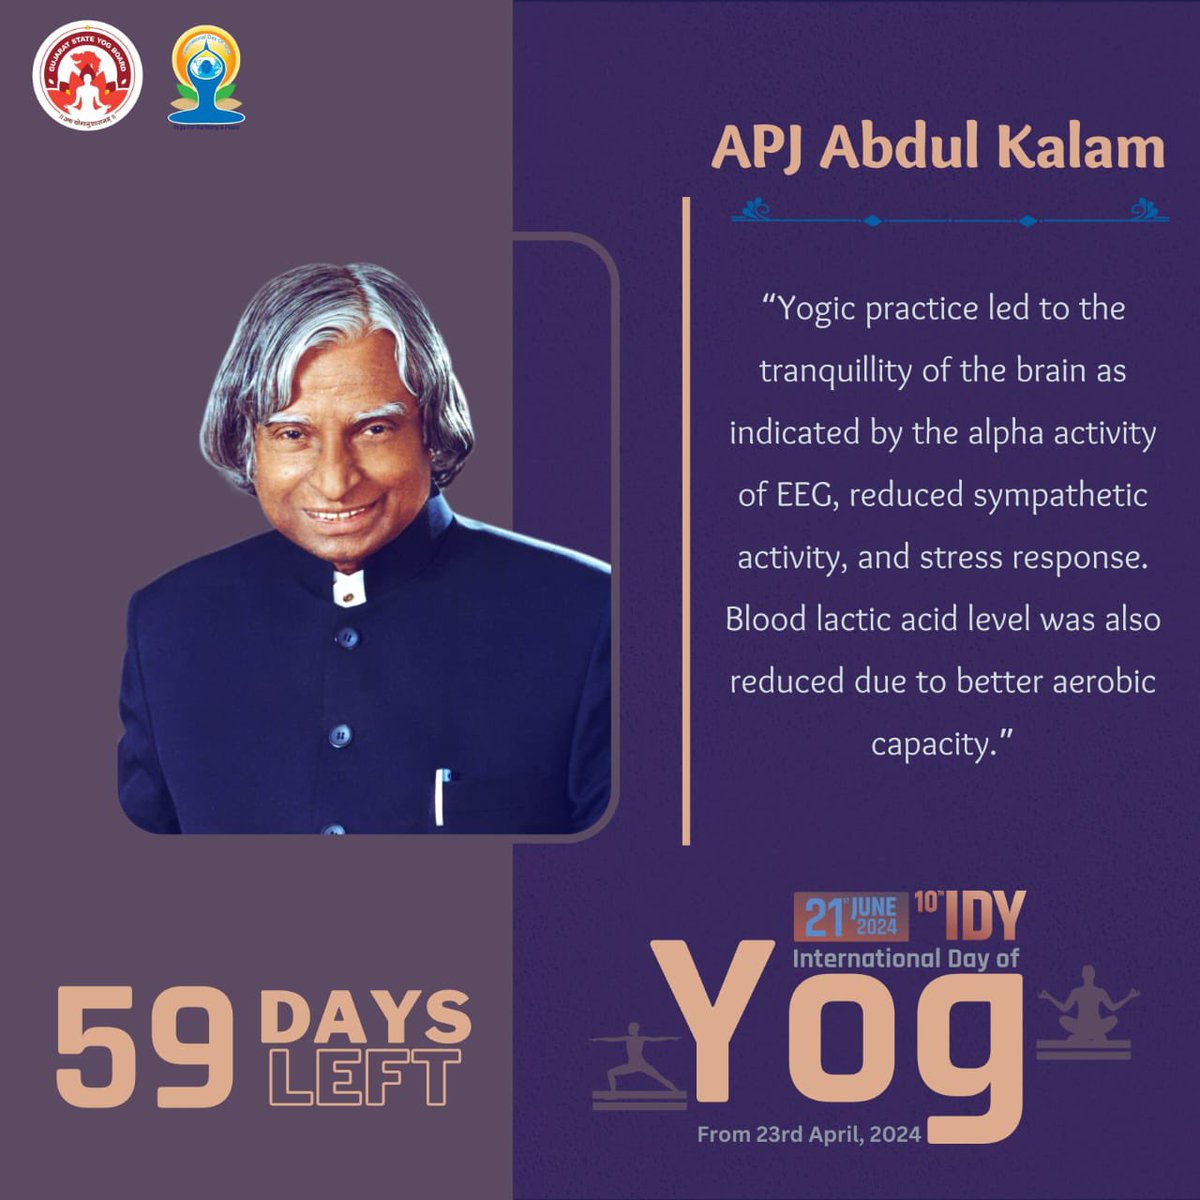 “Yogic practice led to the tranquillity of the brain as indicated by the alpha activity of EEG, reduced sympathetic activity, and stress response. Blood lactic acid level was also reduced due to better aerobic capacity.” - Dr. APJ Abdul Kalam sir #GujaratStateYogBoard #Yogmay